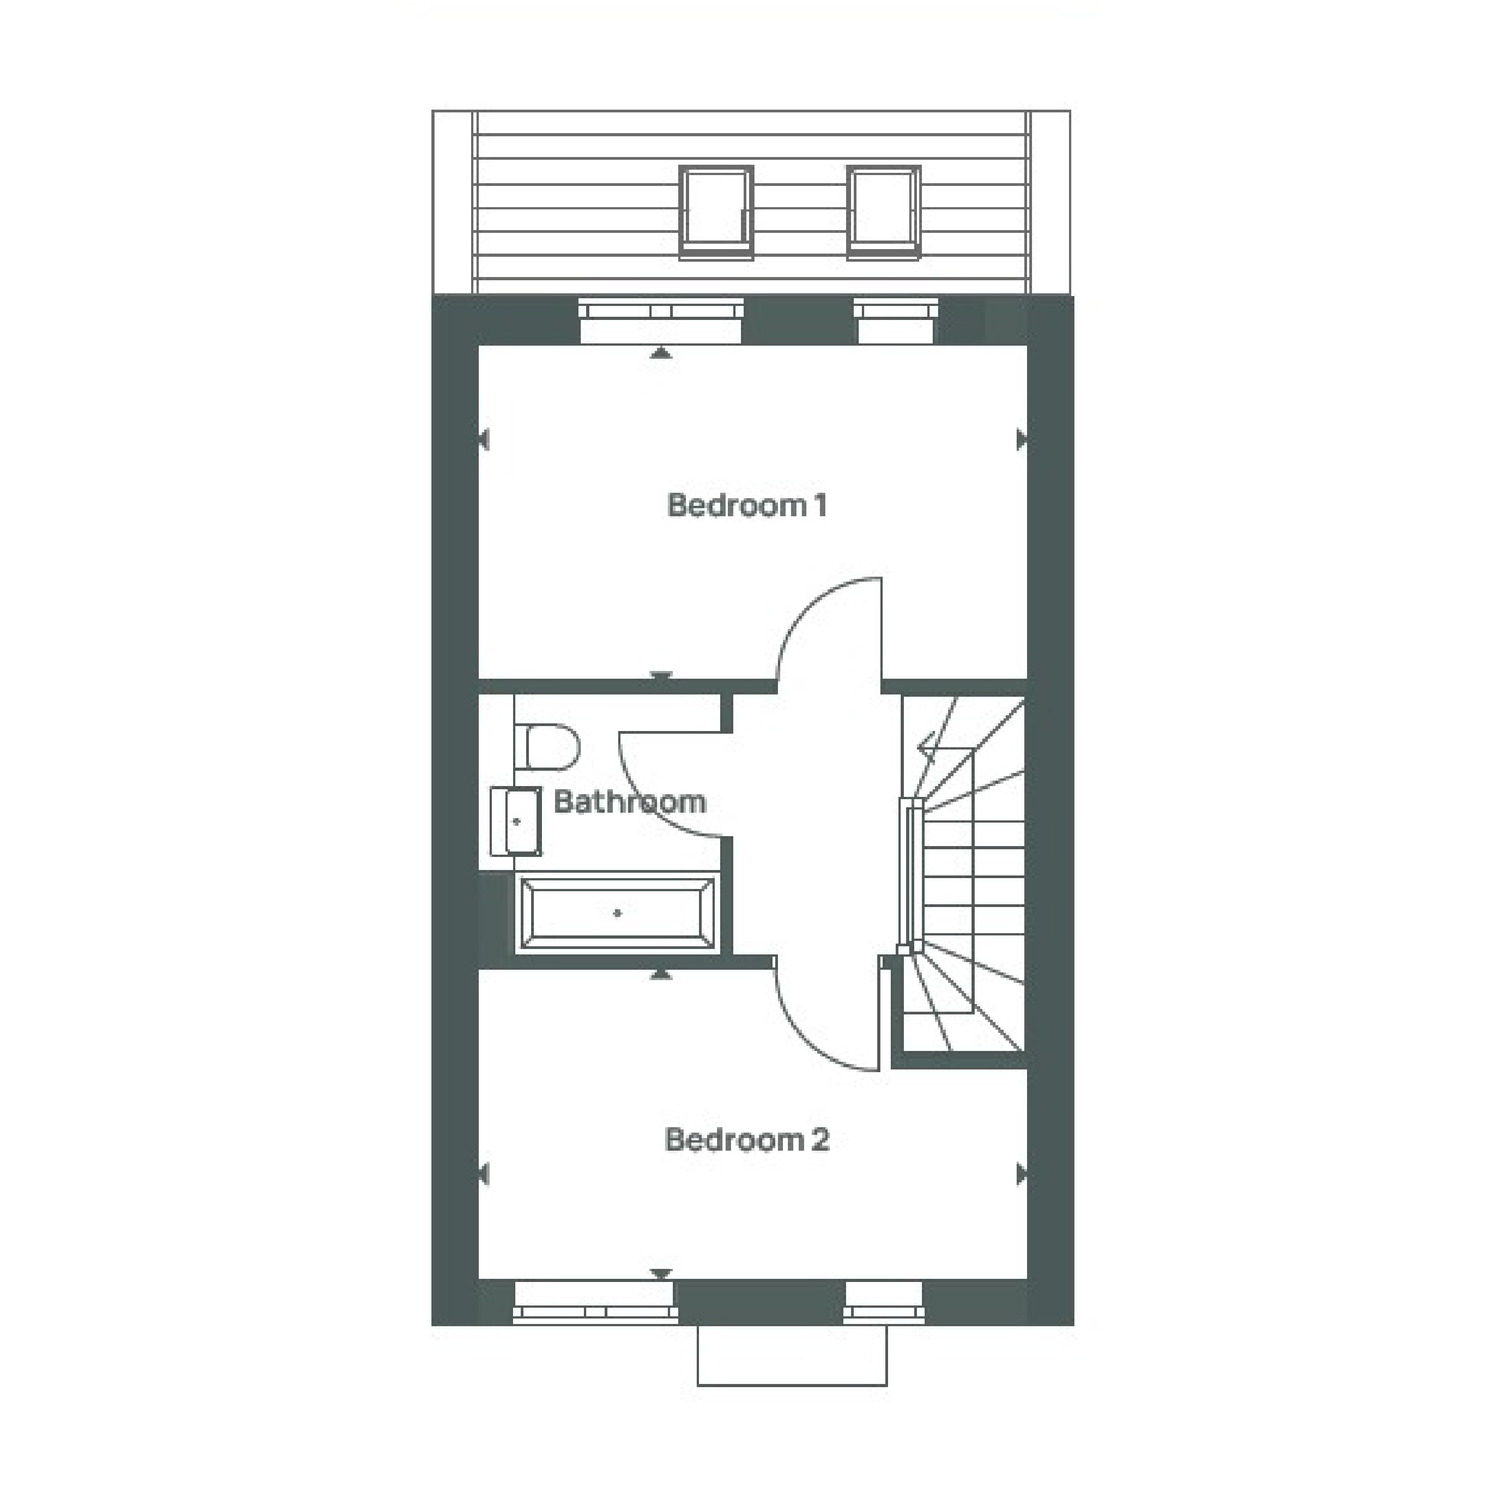 Coopers Hill 2 bed house variation Plot 13,15,17,26,28,29,31,33,14,16,18,27,30,32 first floor-01-01-01